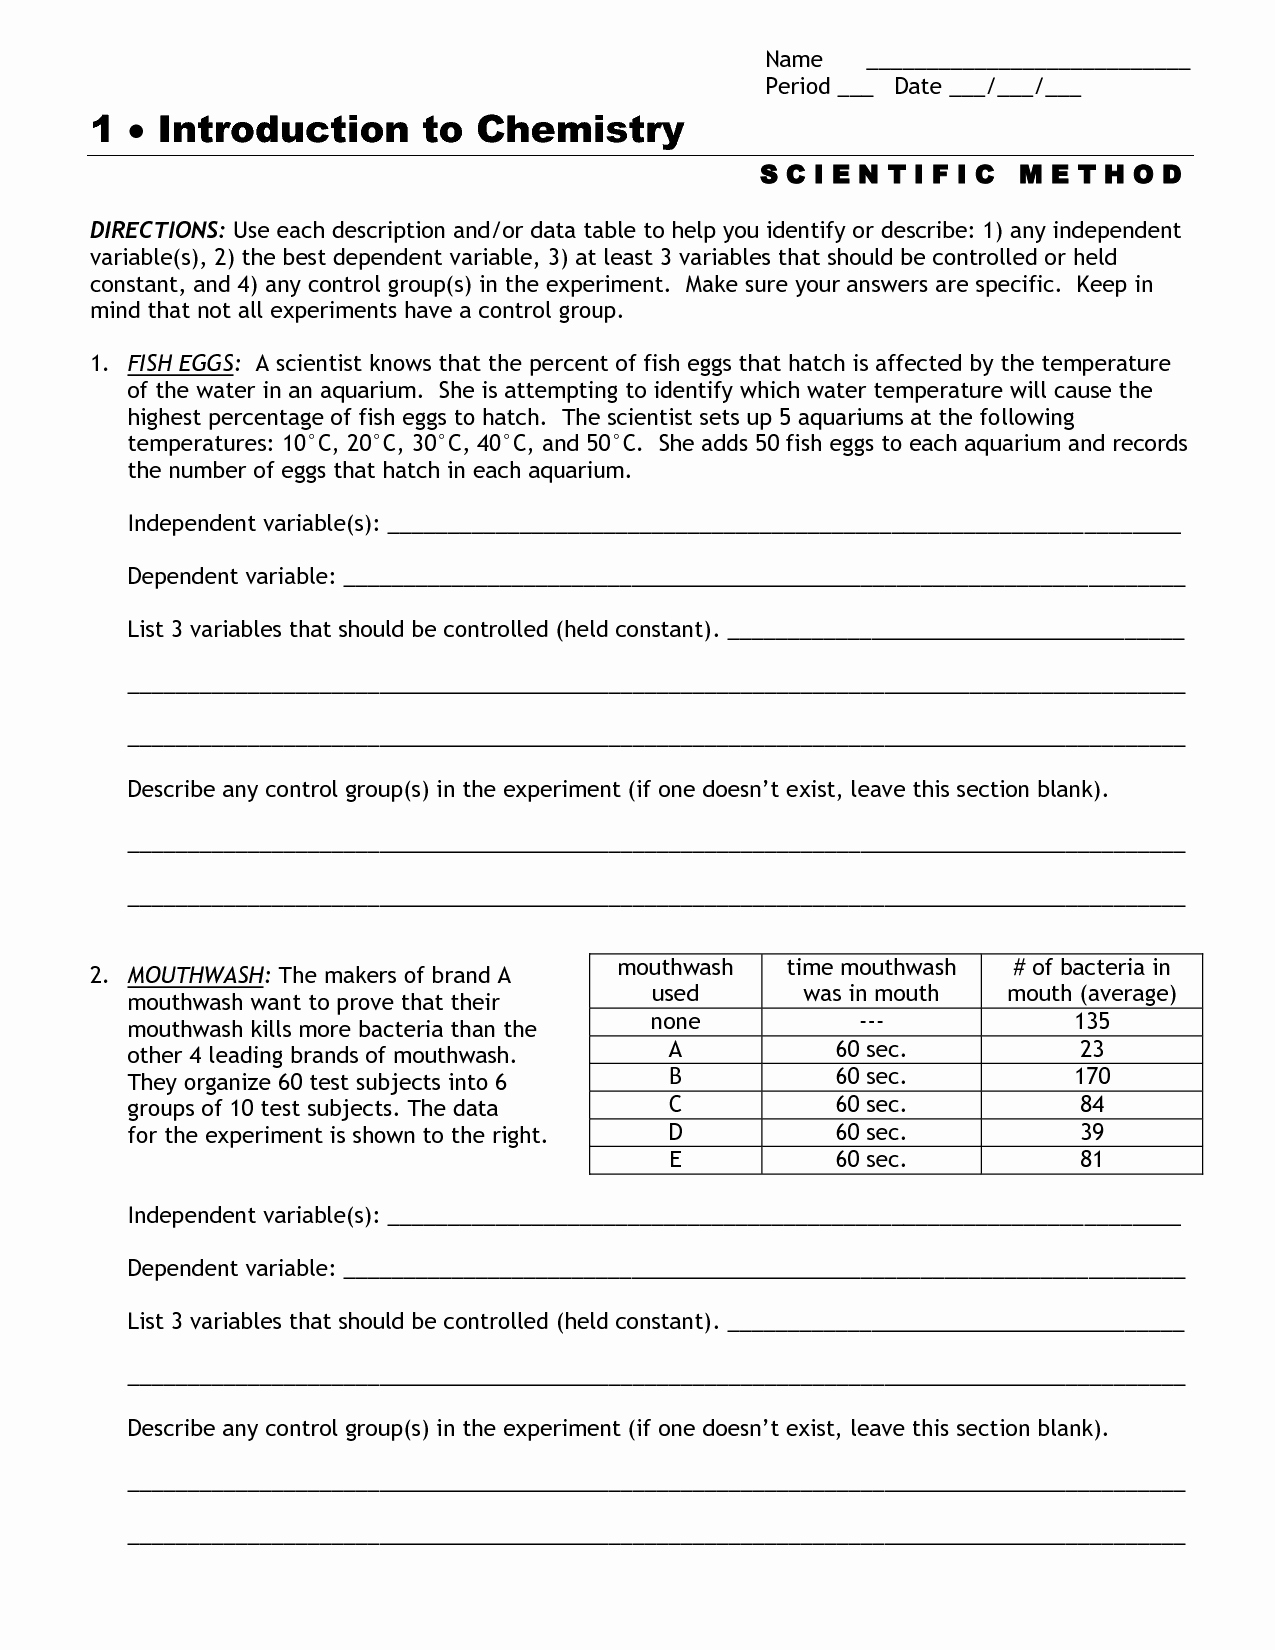 Experimental Variables Worksheet Answers Luxury Experimental Design Worksheet Answer Key